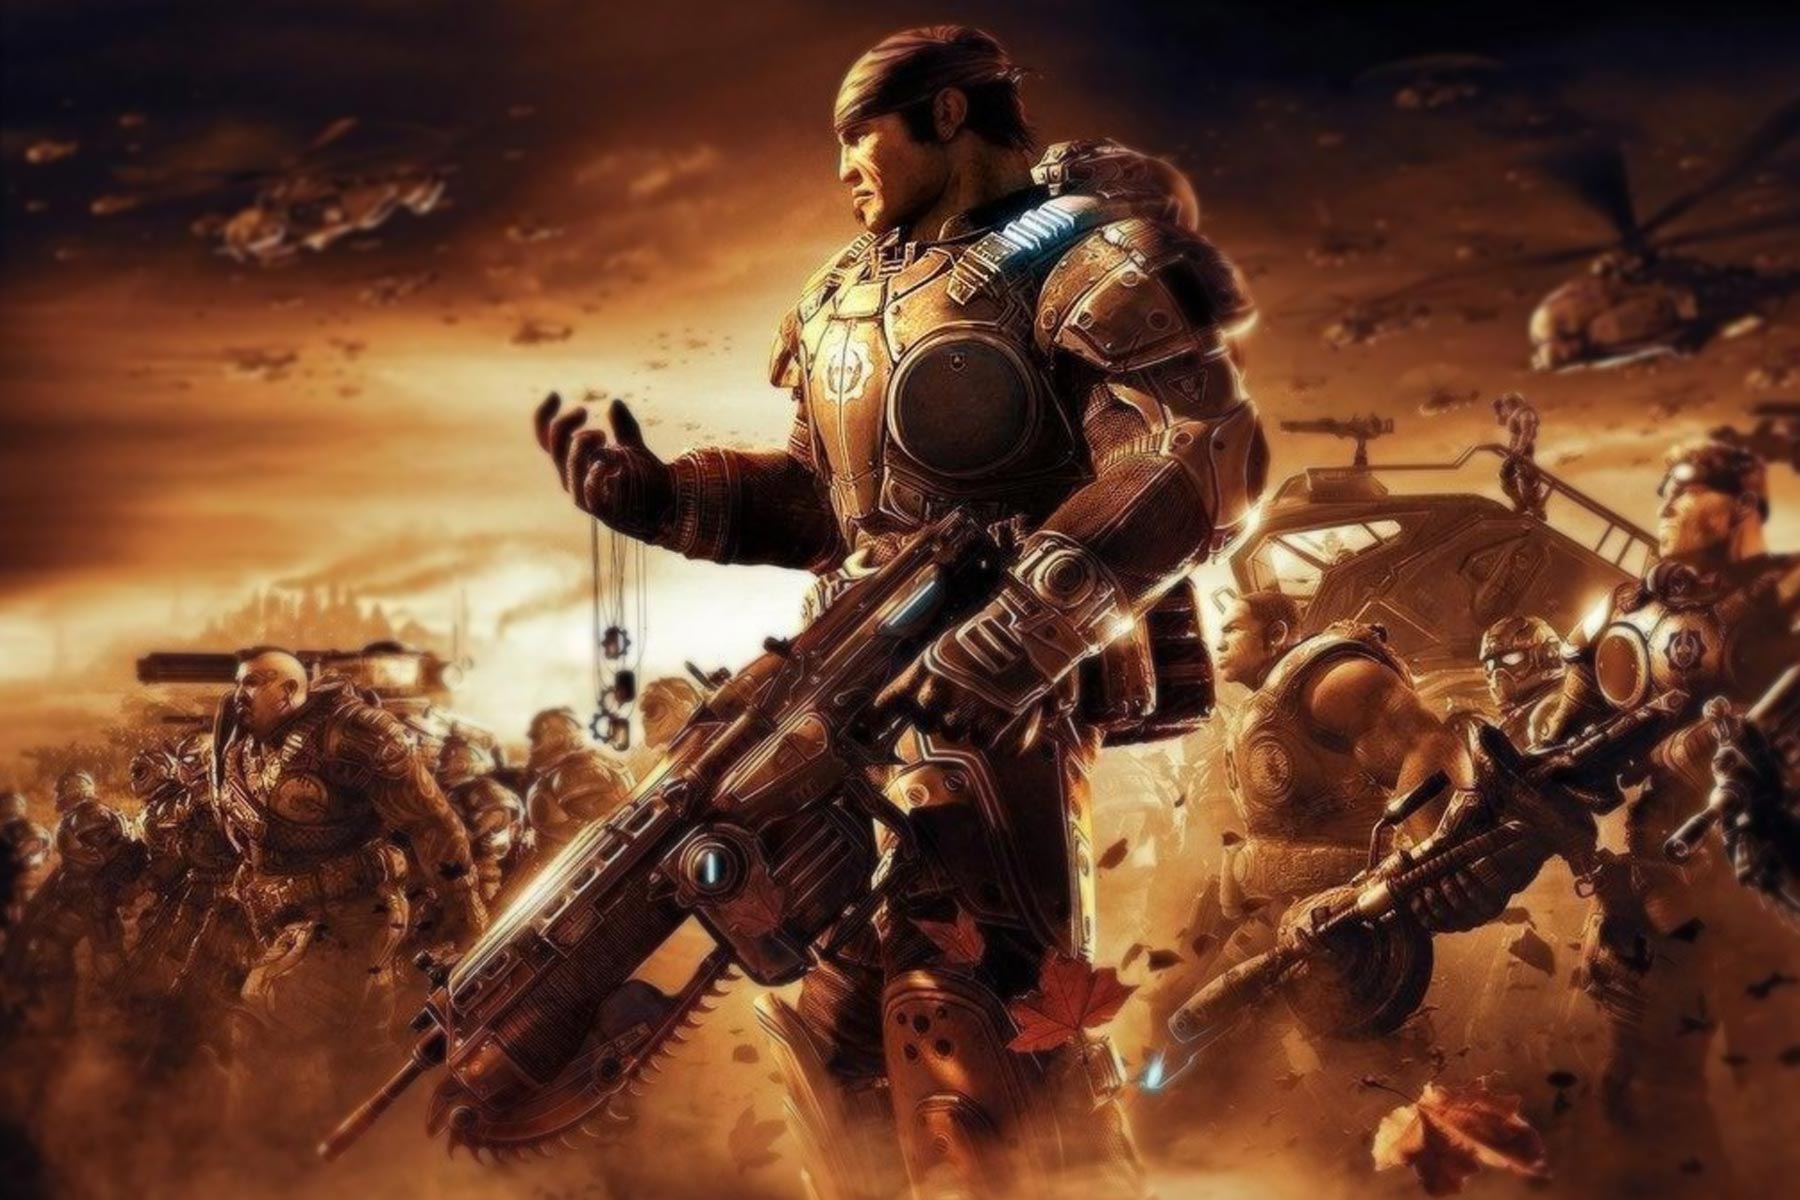 Gears of War joins the exclusivity war, splitting gamers once more